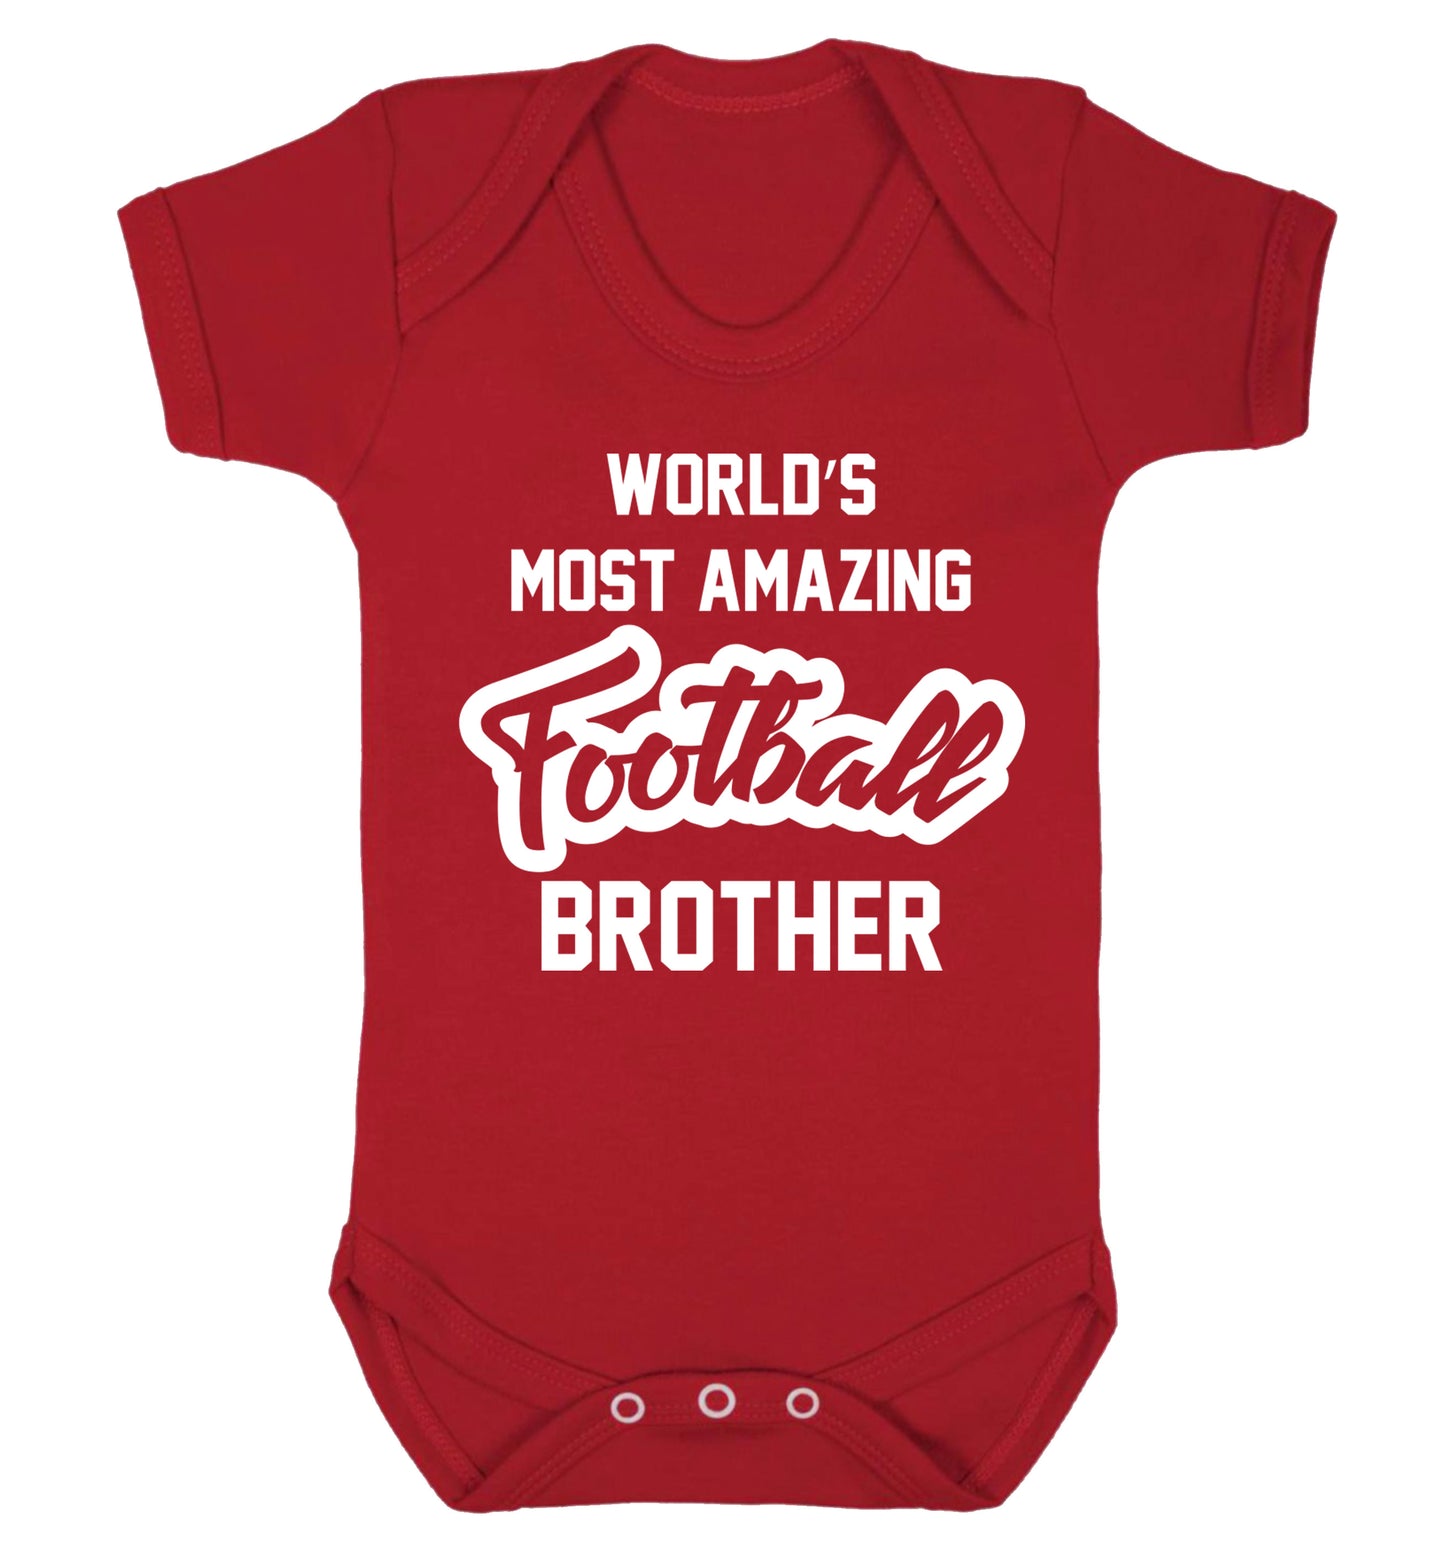 Worlds most amazing football brother Baby Vest red 18-24 months